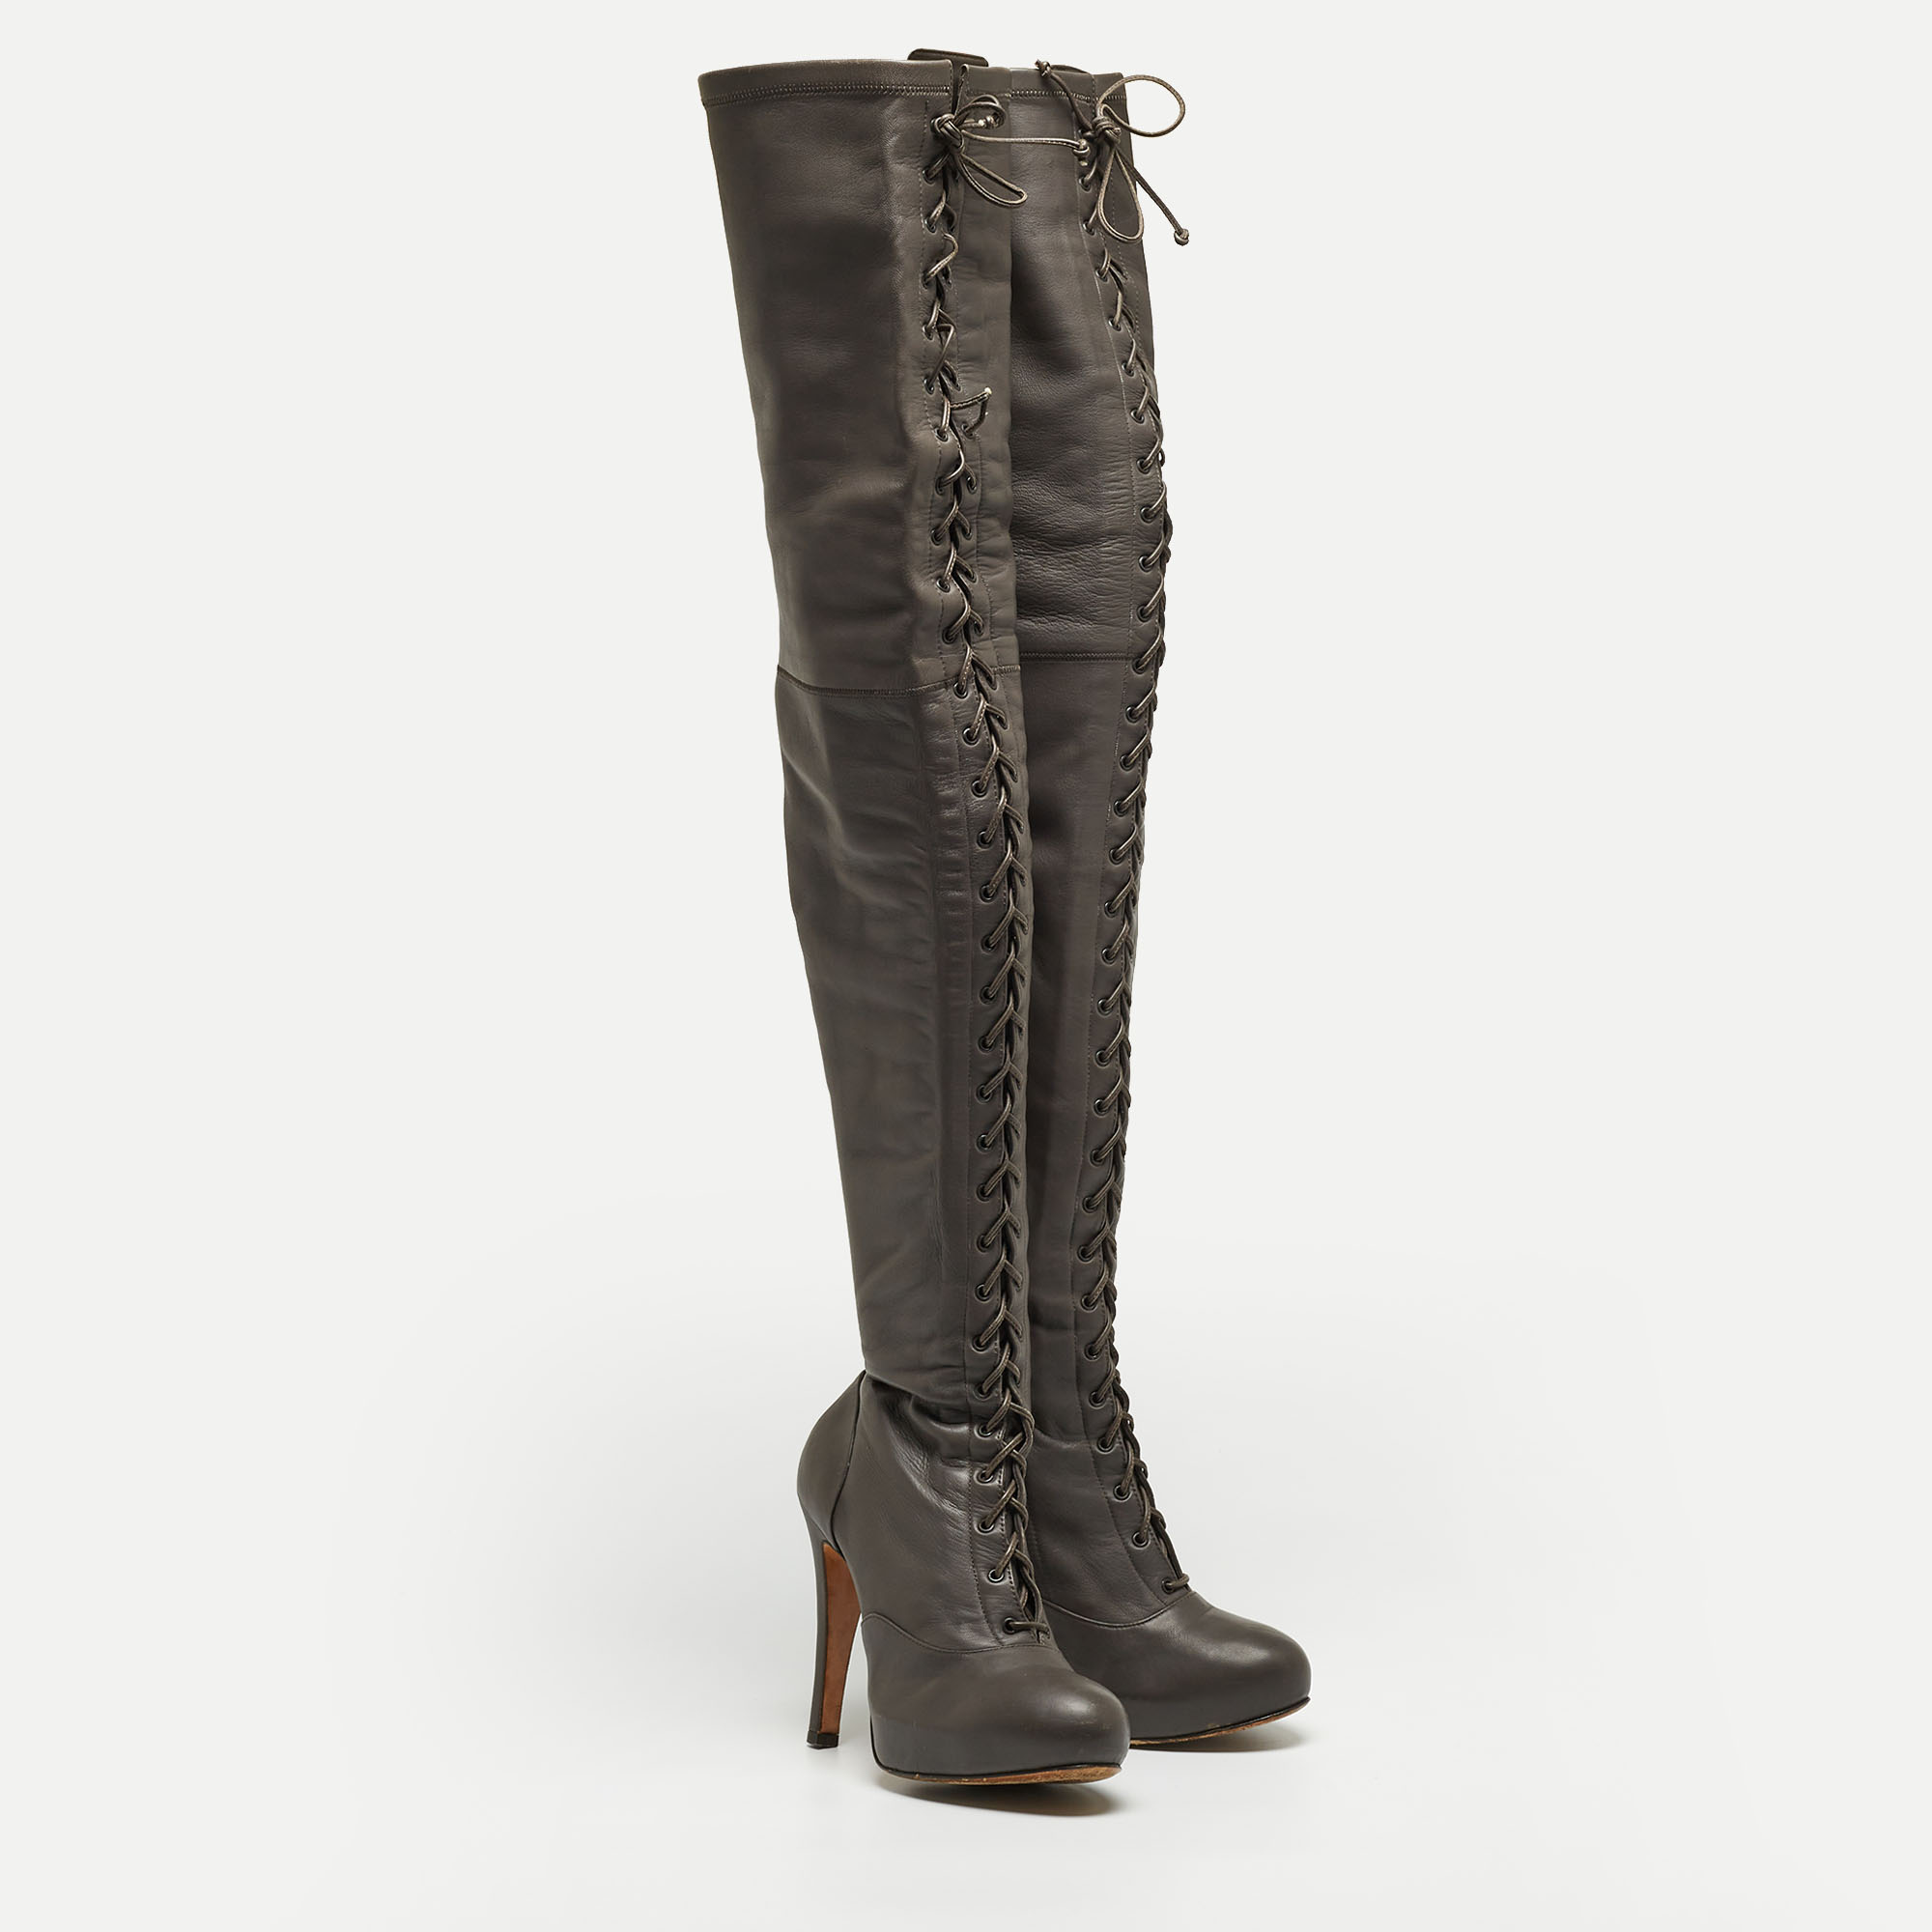 Etro Grey Leather Lace Up Thigh High Boots Size 39